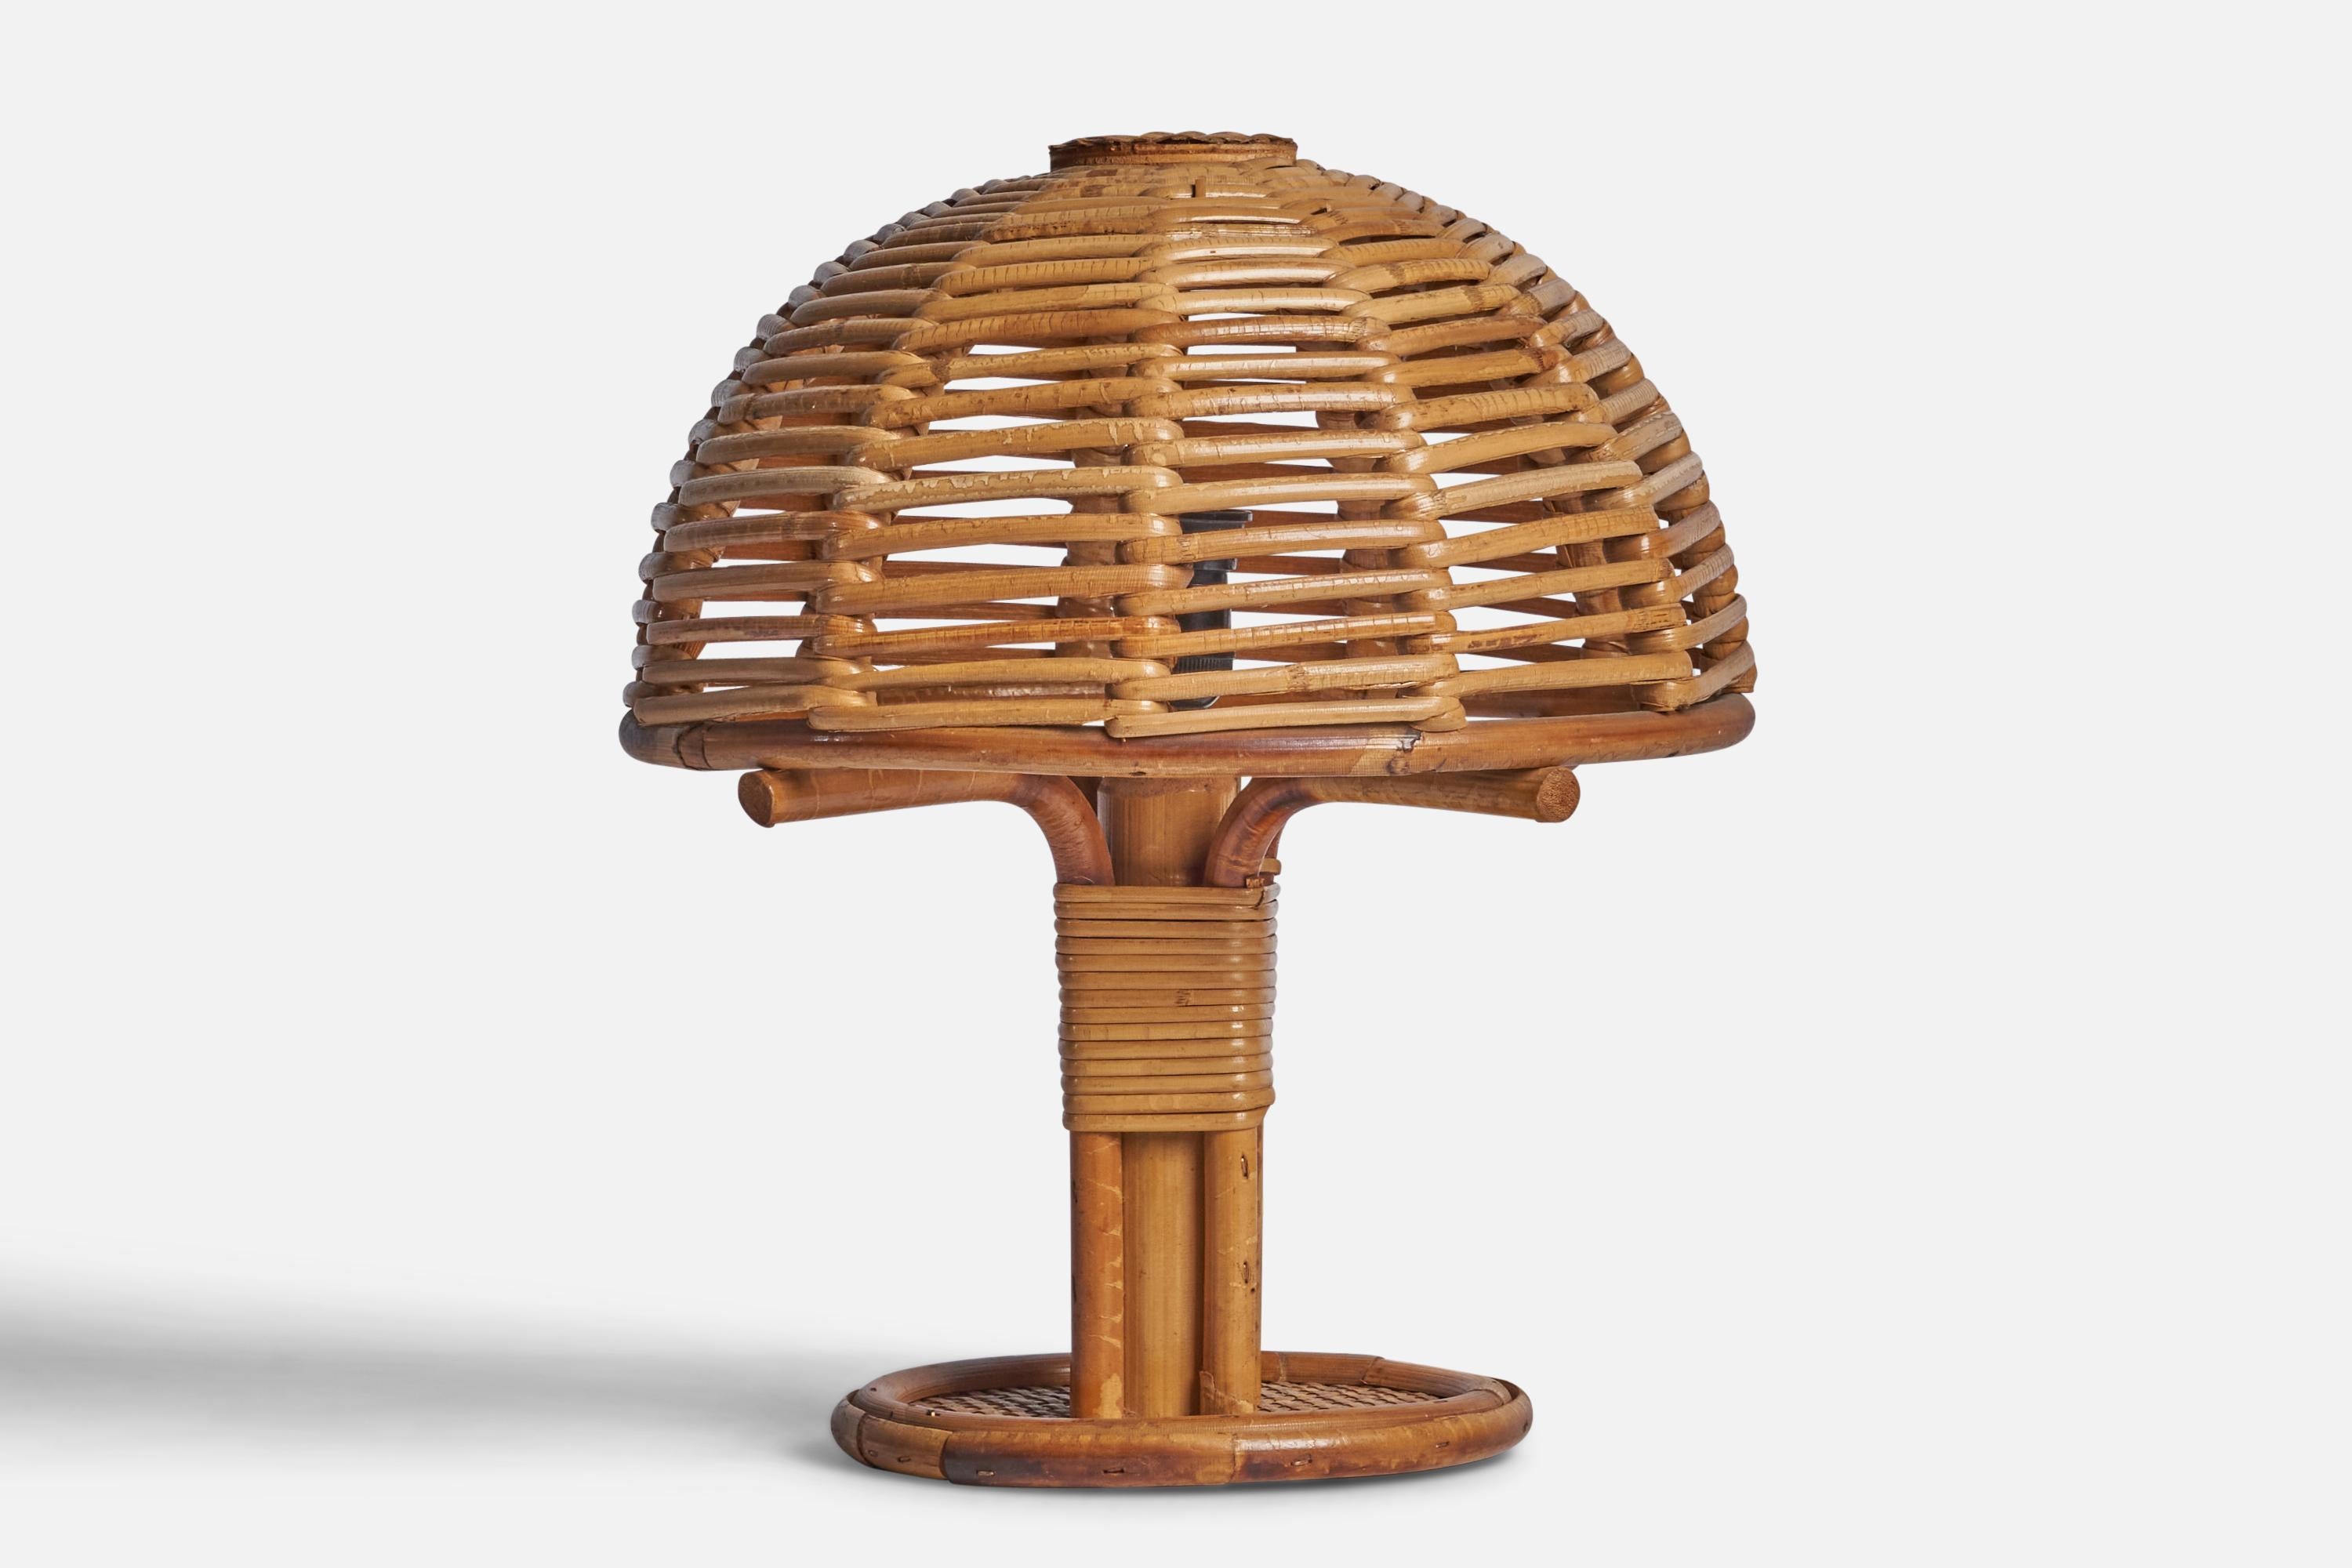 A moulded bamboo and rattan table lamp designed and produced in Italy, 1970s.

Overall Dimensions (inches): 11.5” H x 10” Diameter
Bulb Specifications: E-14 Bulb
Number of Sockets: 1
All lighting will be converted for US usage. We are unable to